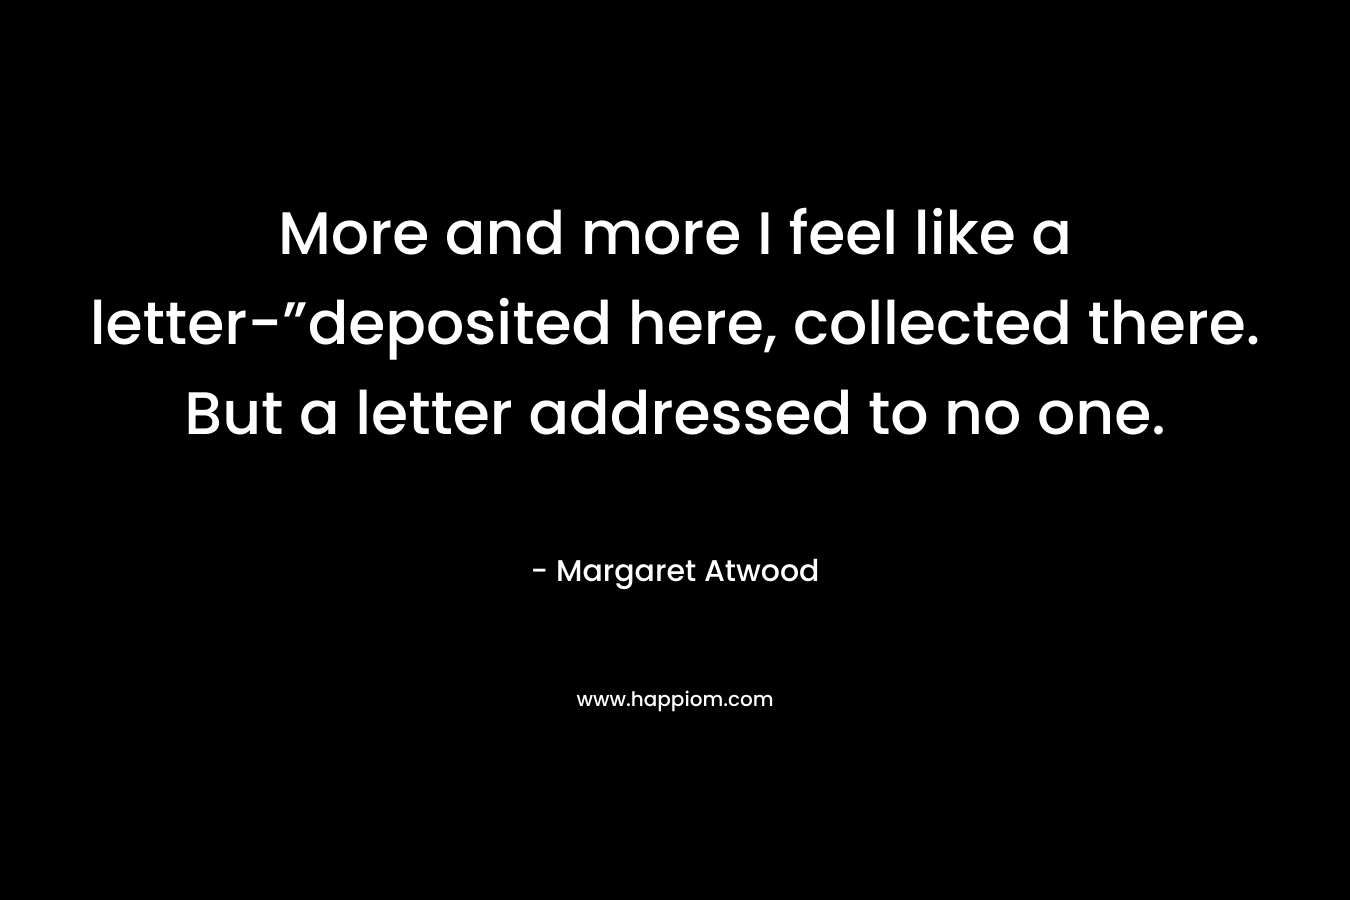 More and more I feel like a letter-”deposited here, collected there. But a letter addressed to no one. – Margaret Atwood